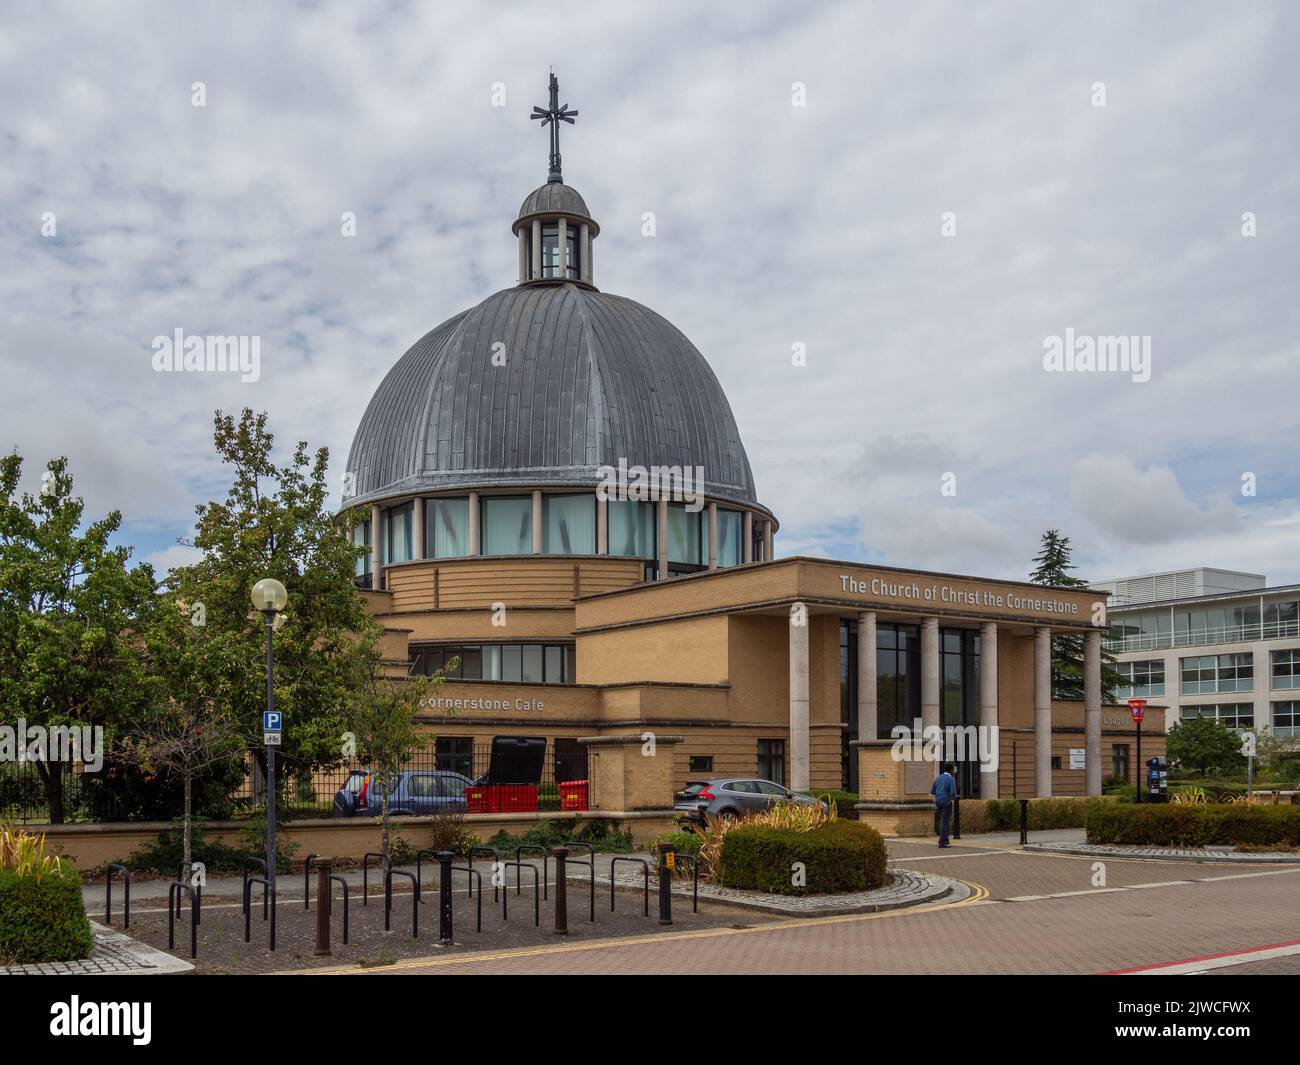 The Church of Christ the Cornerstone based in the Guildhall, Central Milton Keynes, Buckinghamshire, UK Stock Photo